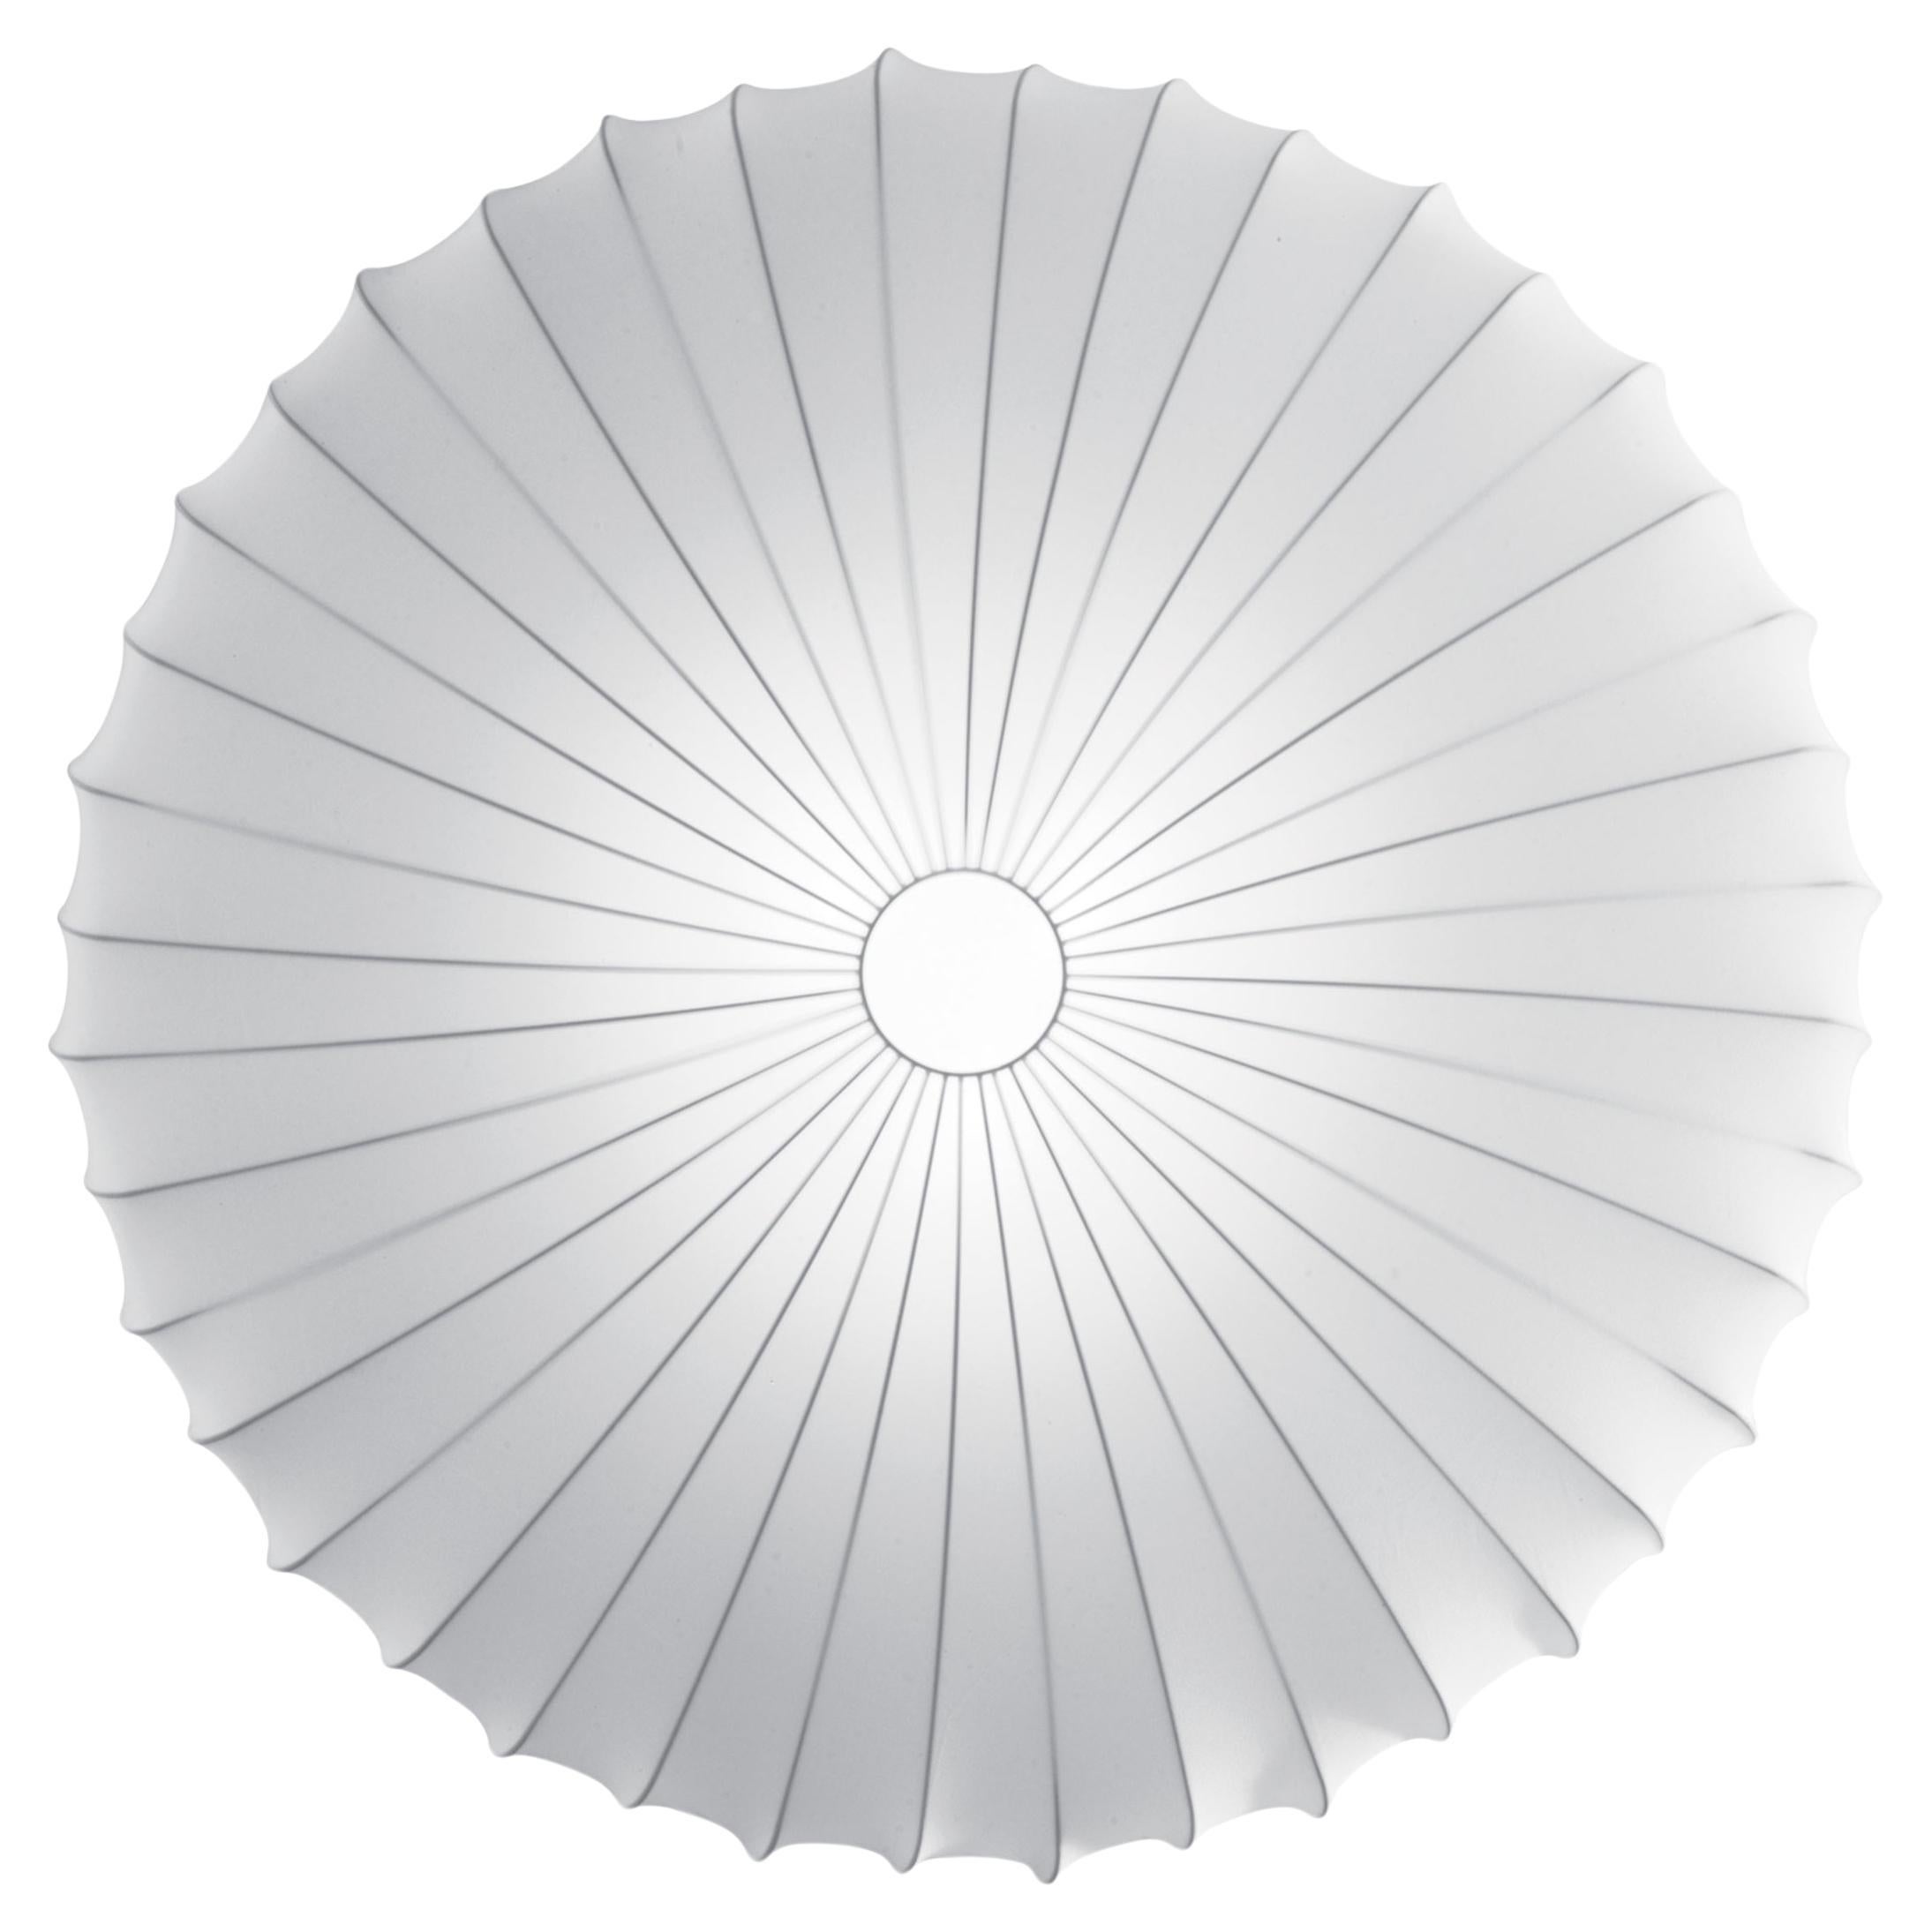 Axolight Muse Large Ceiling Light in White with White Metal Finish